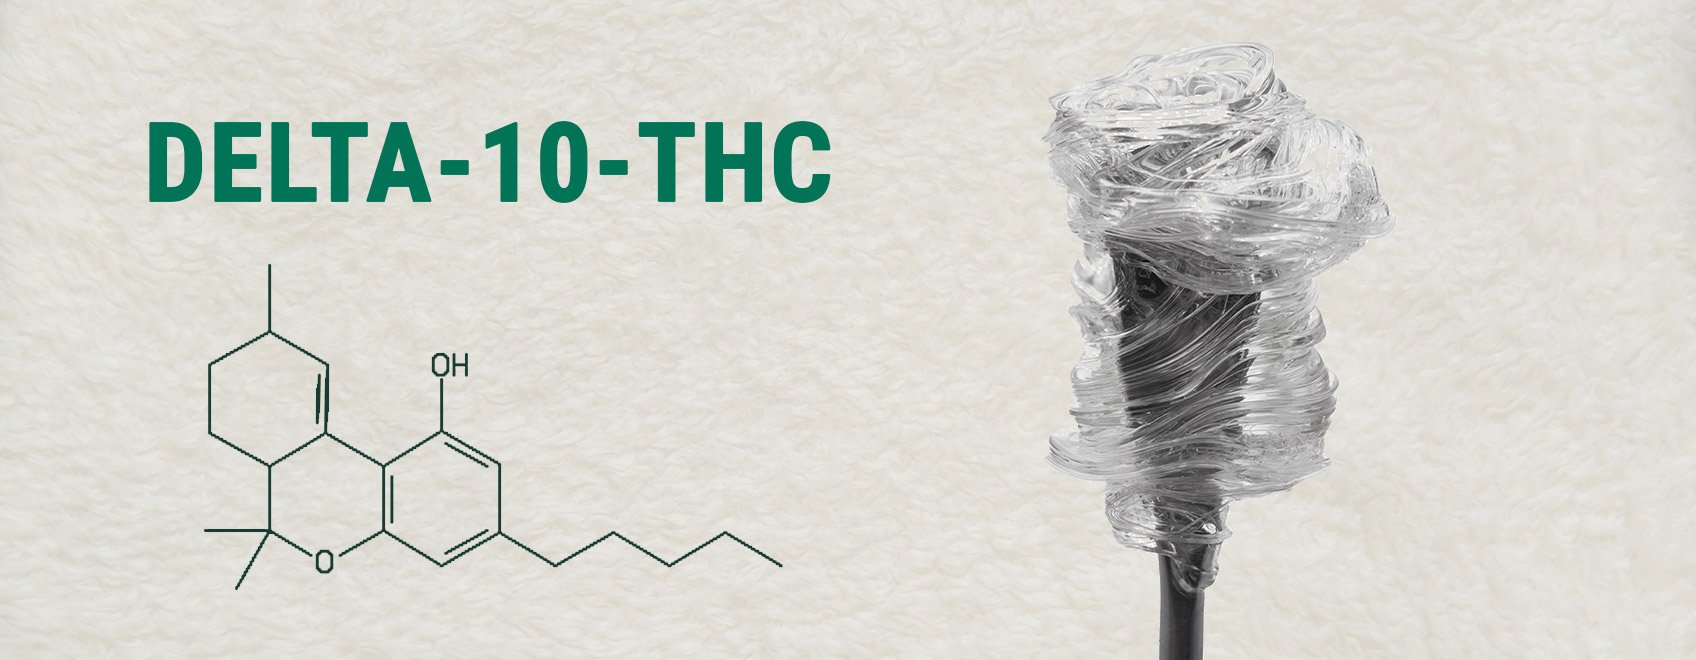 Discover Delta-8-THC and Delta-10-THC